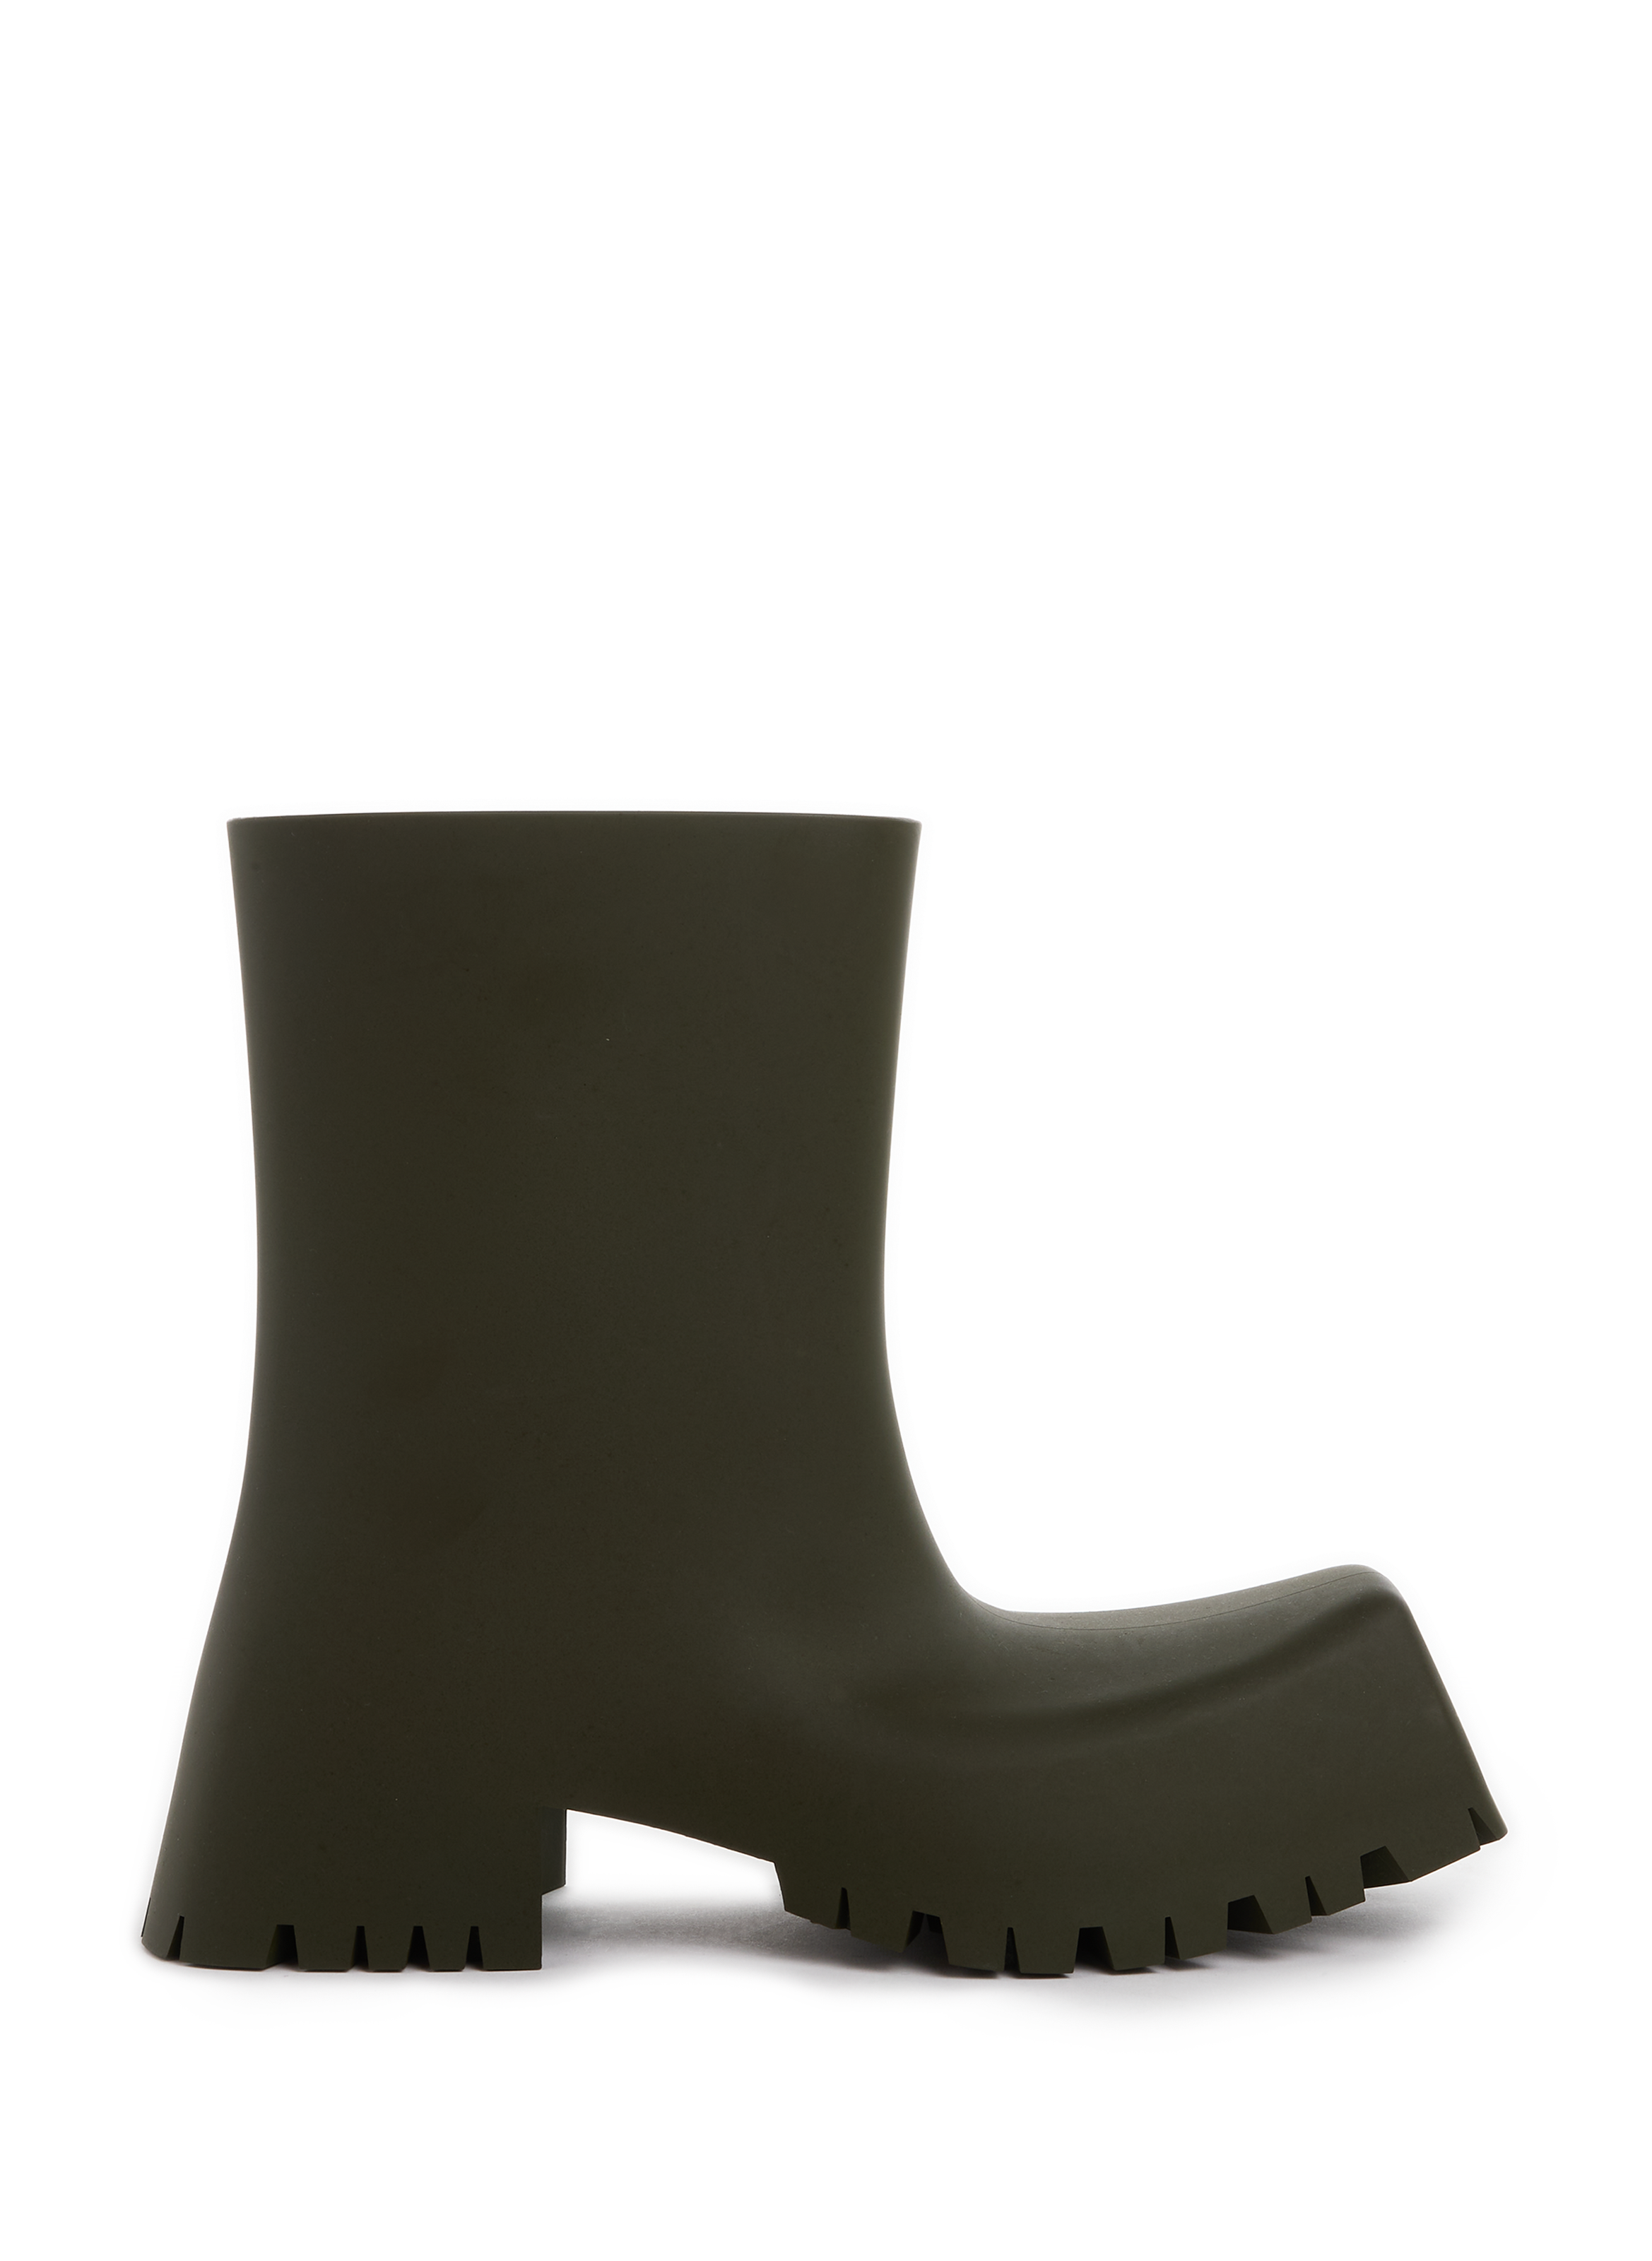 Balenciaga Trooper Rubber Boots 2021 Ahhb hell NAWWW 6 he got on th  4 es THIS DuvE d WEARING THE PM  12 So Tresrnnbicnsen d This di dude fr  fr from takina rocket  iFunny Brazil